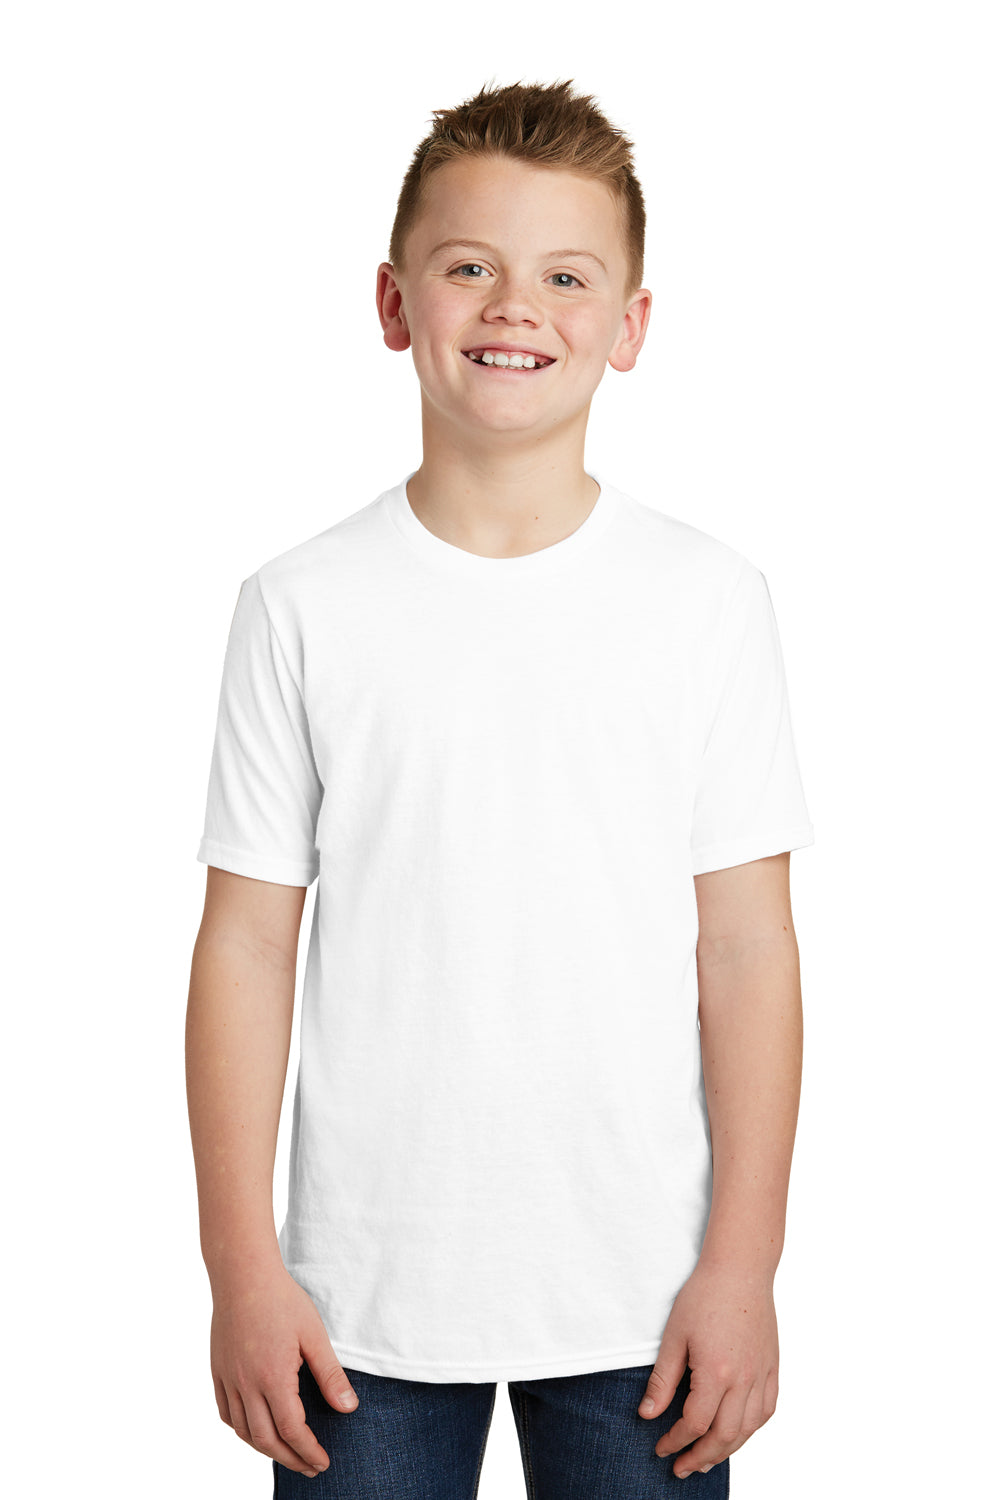 District DT6000Y Youth Very Important Short Sleeve Crewneck T-Shirt White Front